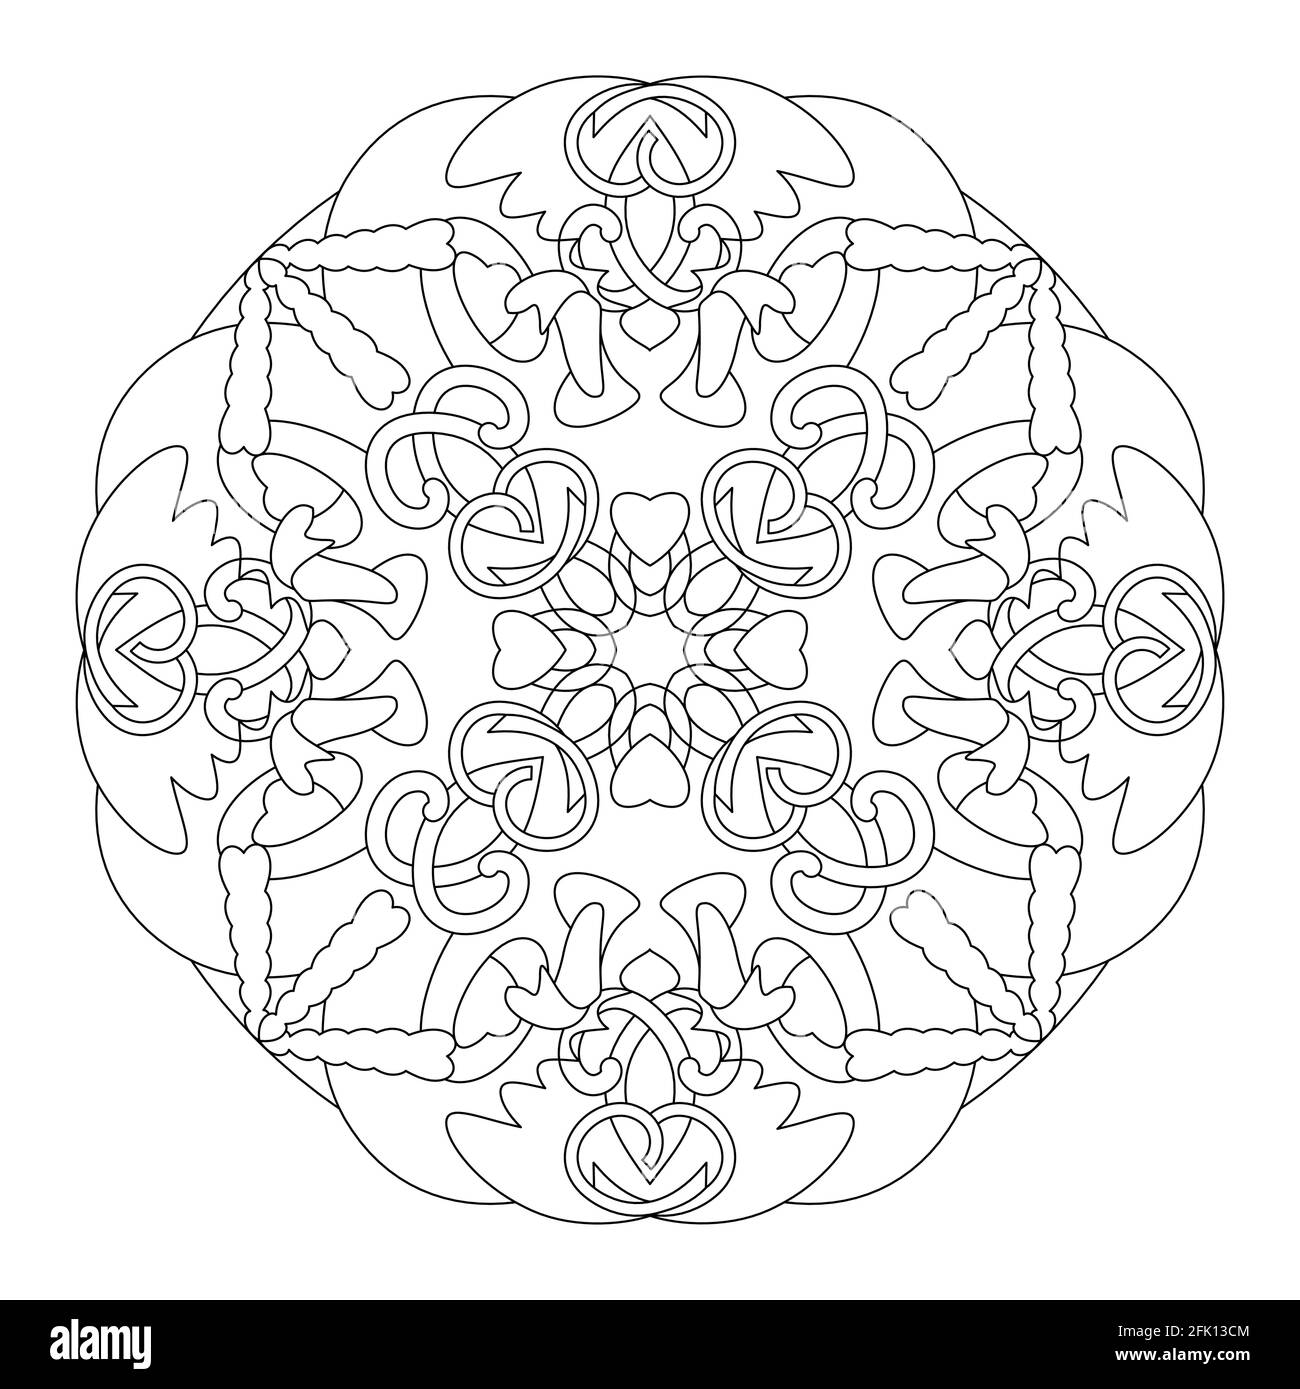 Mandala coloring page. Abstract background with hearts. Art Therapy. Anti-stress. Vector illustration black and white. Stock Vector